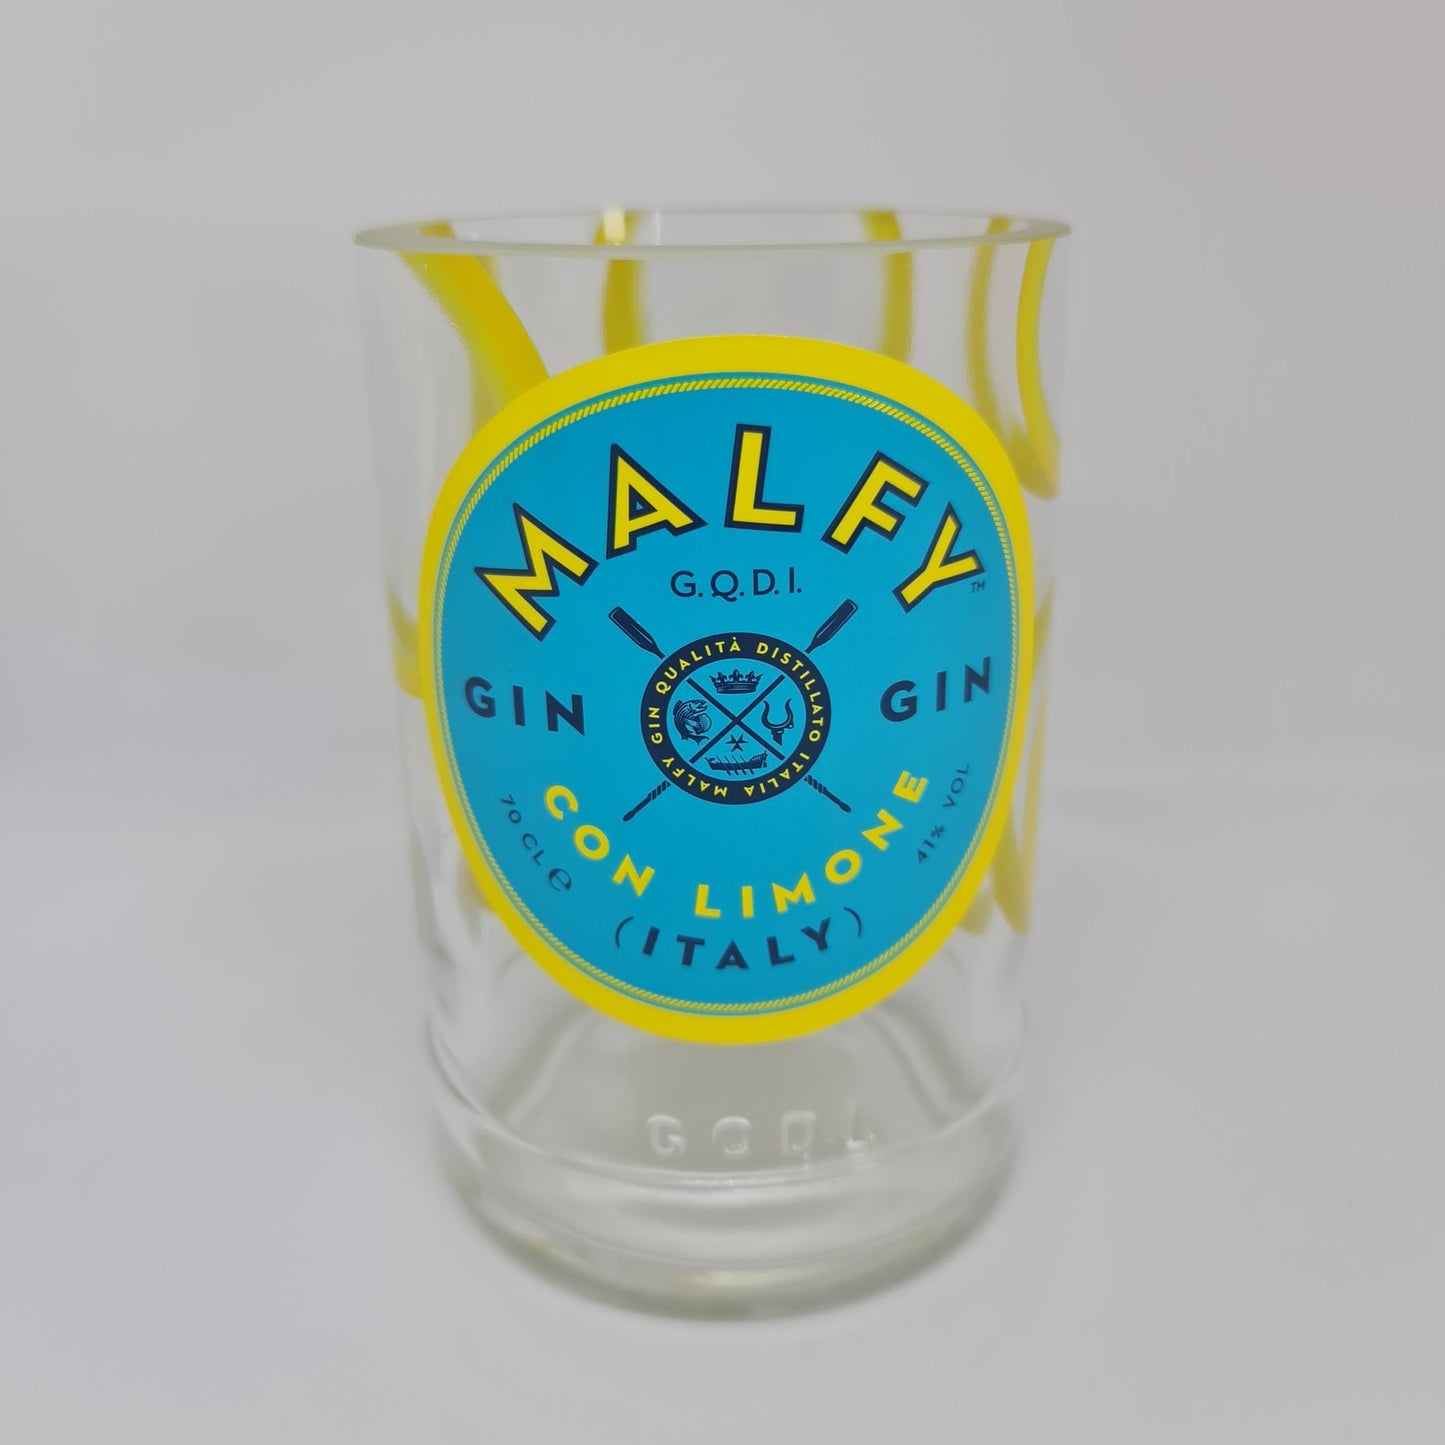 Malfy Con Limone Gin Bottle Candle